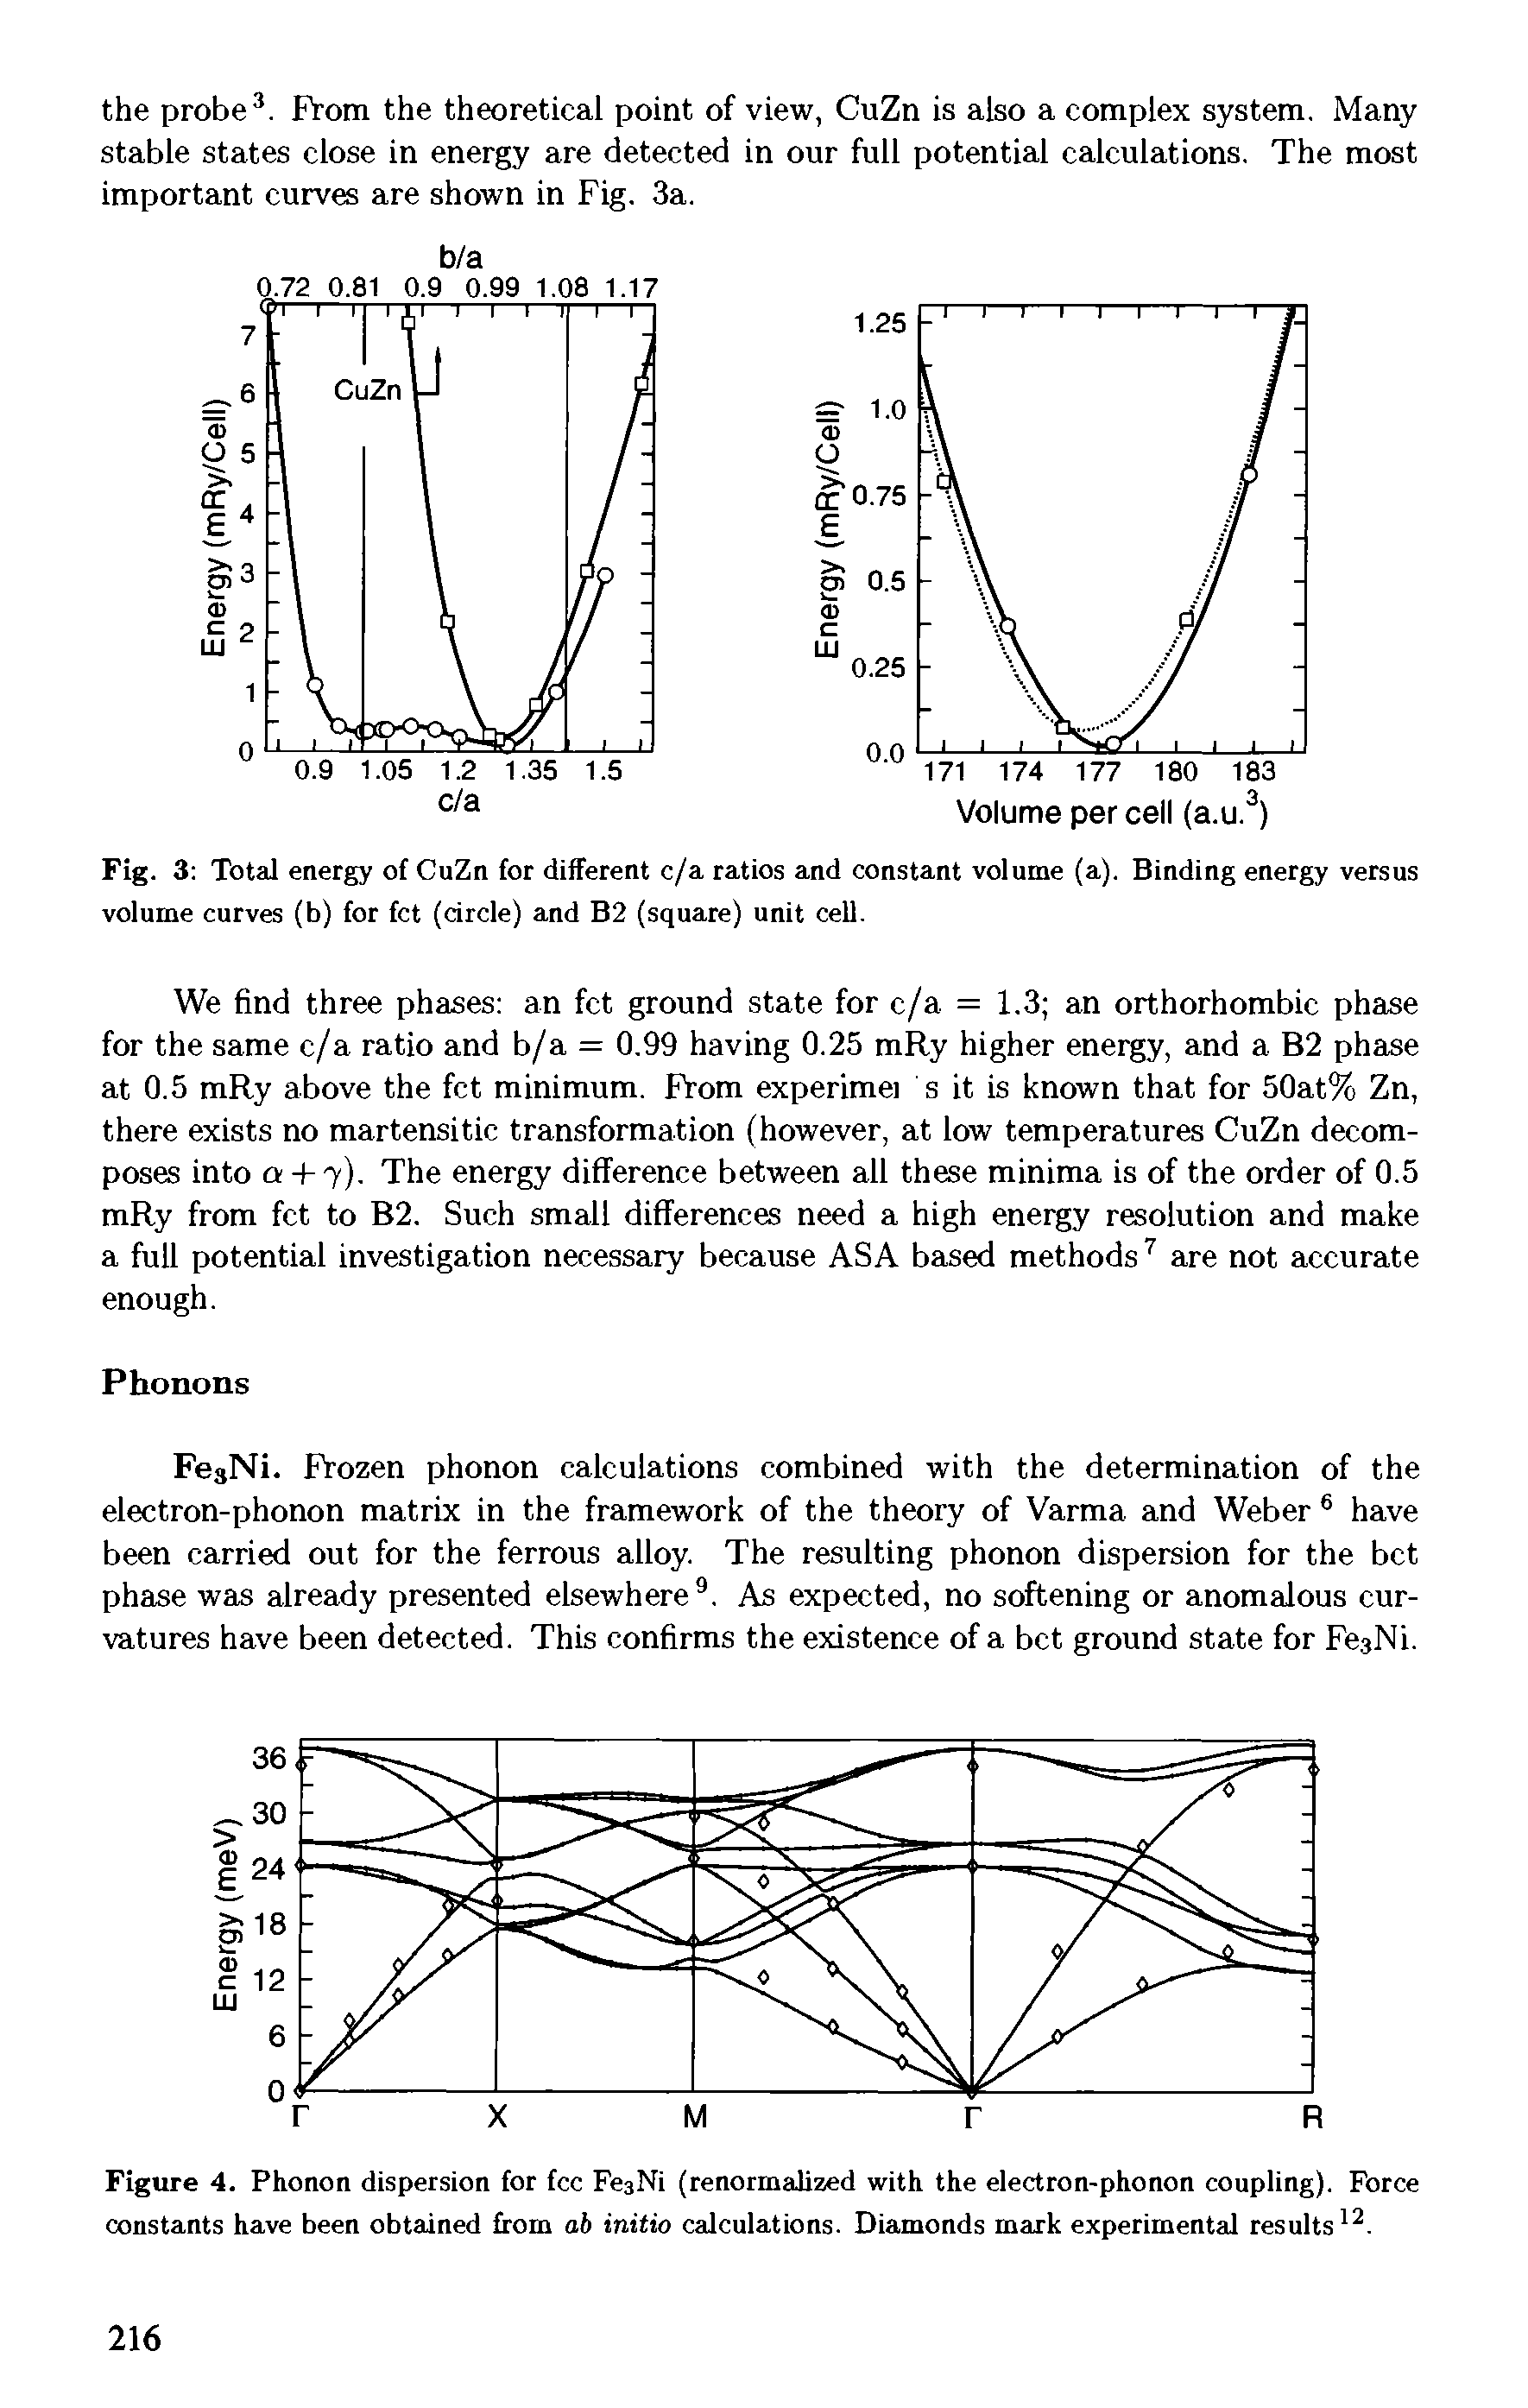 Fig. 3 Total energy of CuZn for different c/a ratios and constant volume (a). Binding energy versus volume curves (b) for fct (circle) and B2 (square) unit cell.